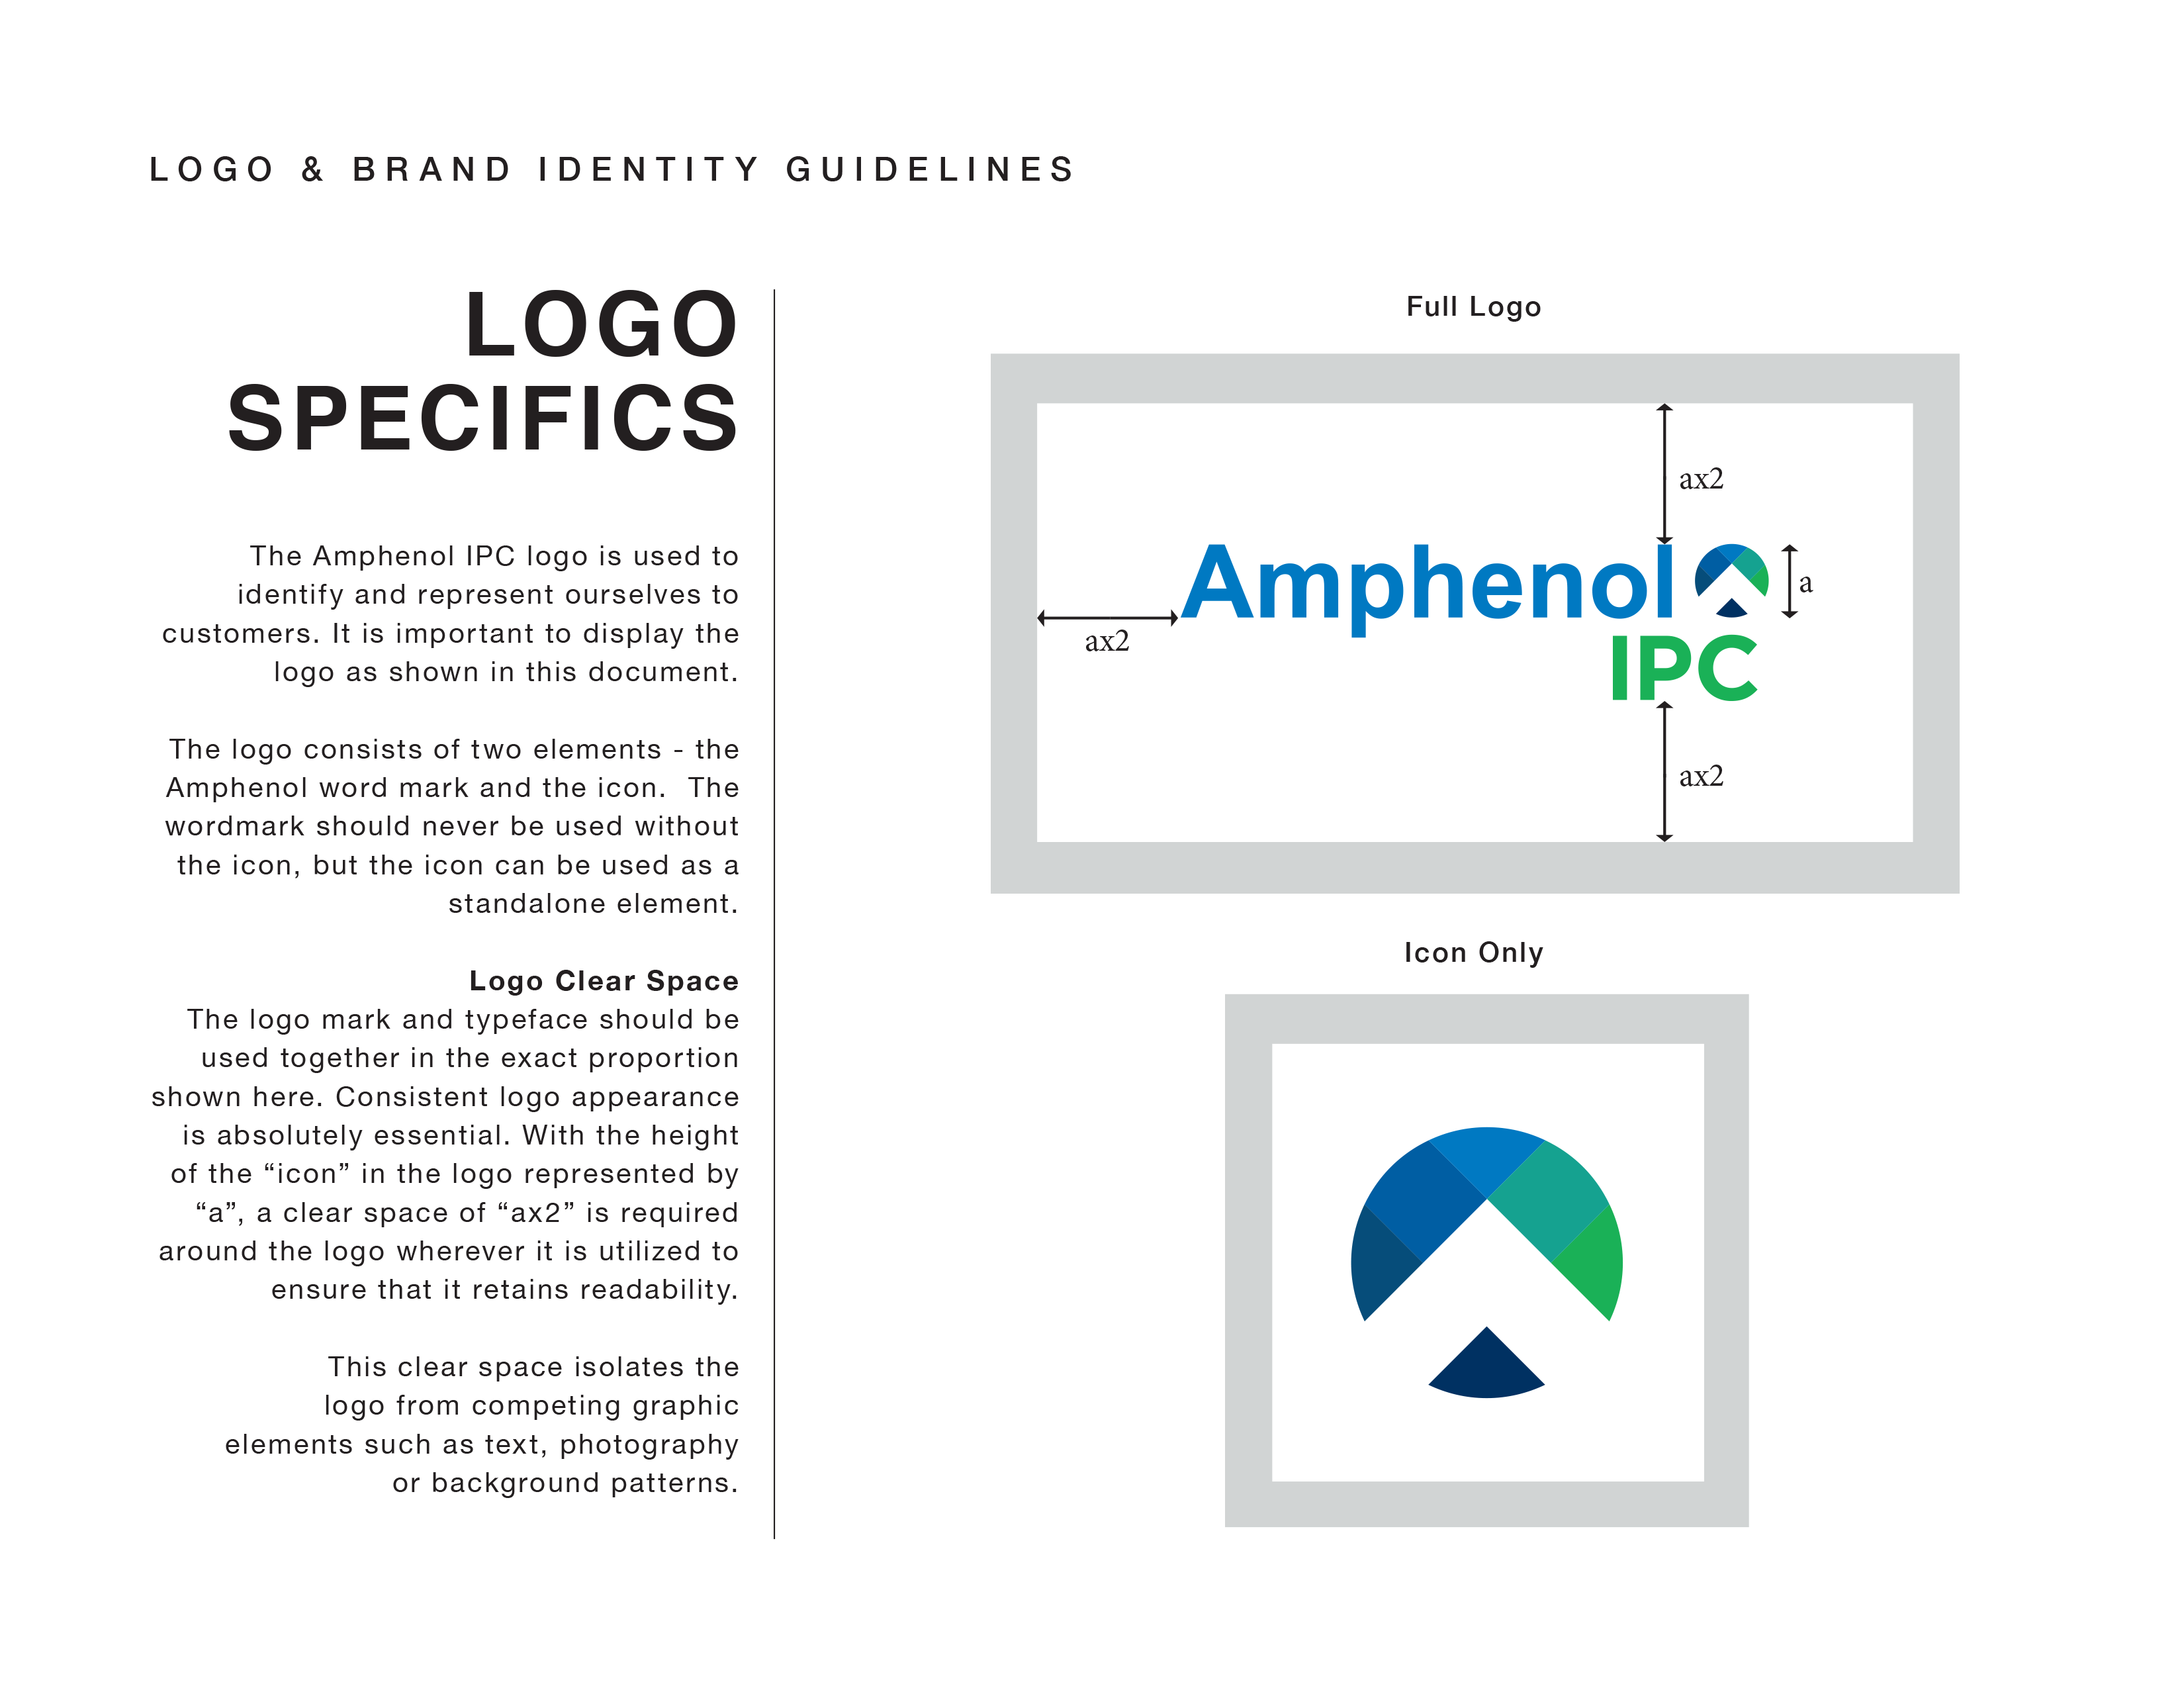 Amphenol brand guidelines showing logo specifics